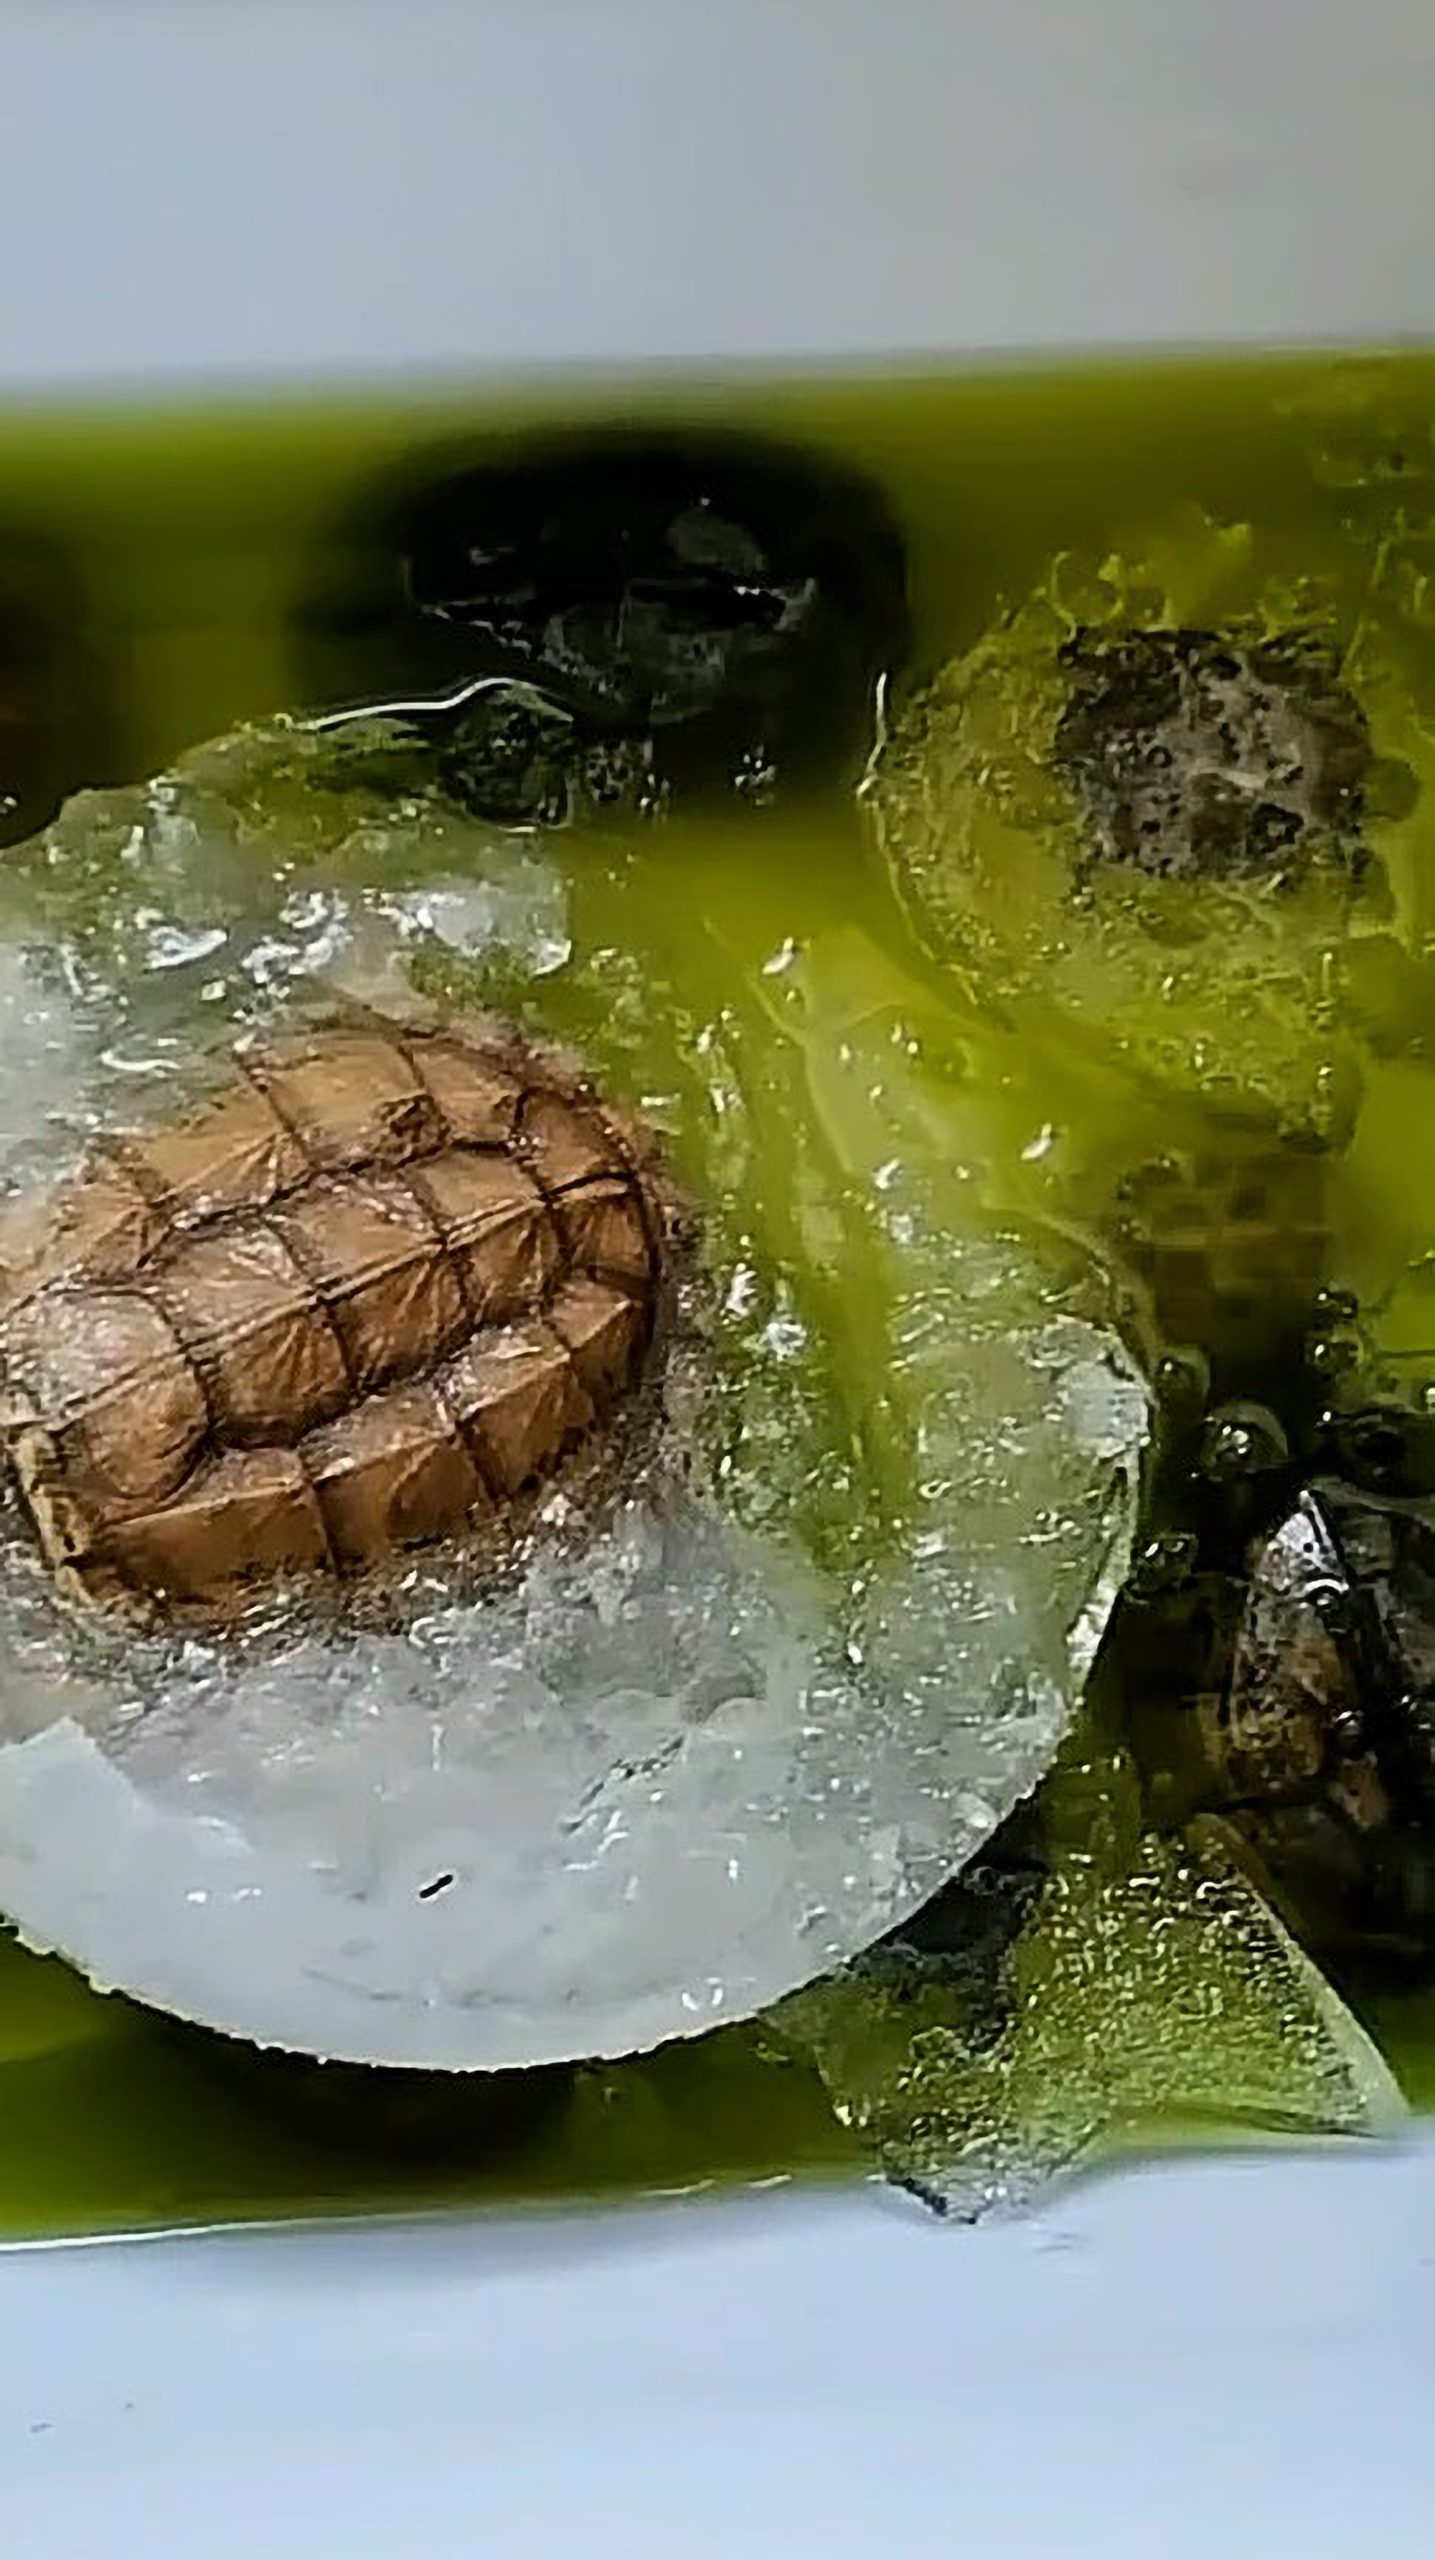 Read more about the article Frozen Turtles Thaw And Come Back To Life After Woman Leaves Them Outside In Icy Temps